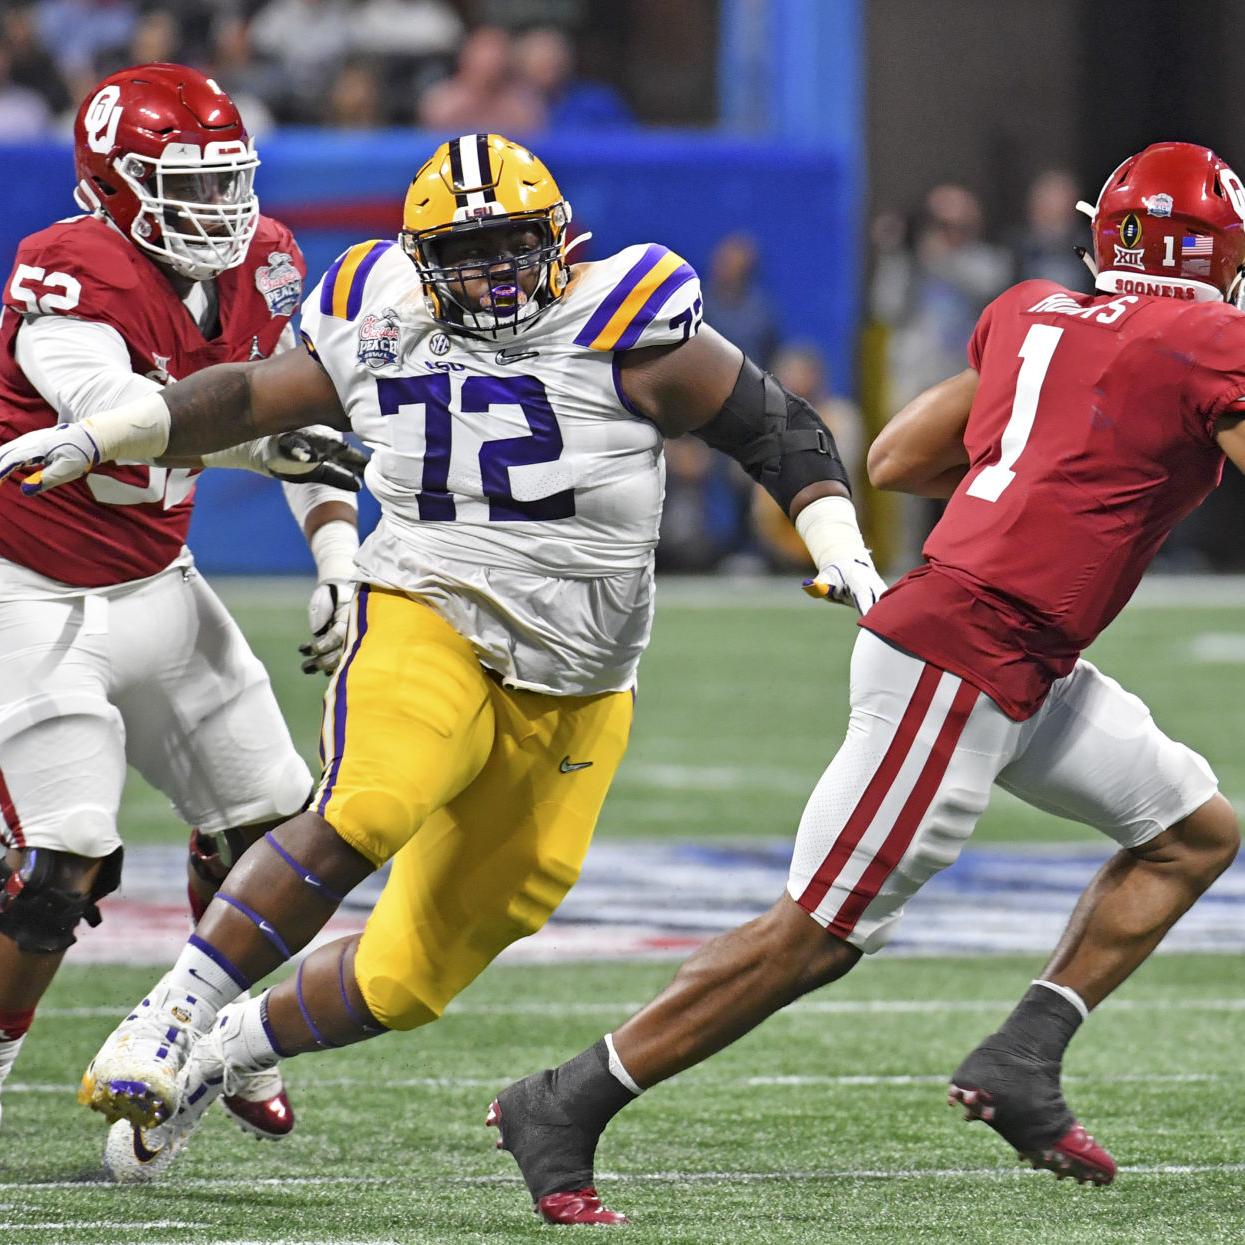 LSU's Tyler Shelvin remains opted out and will prepare for the NFL draft  after speculation | LSU | theadvocate.com